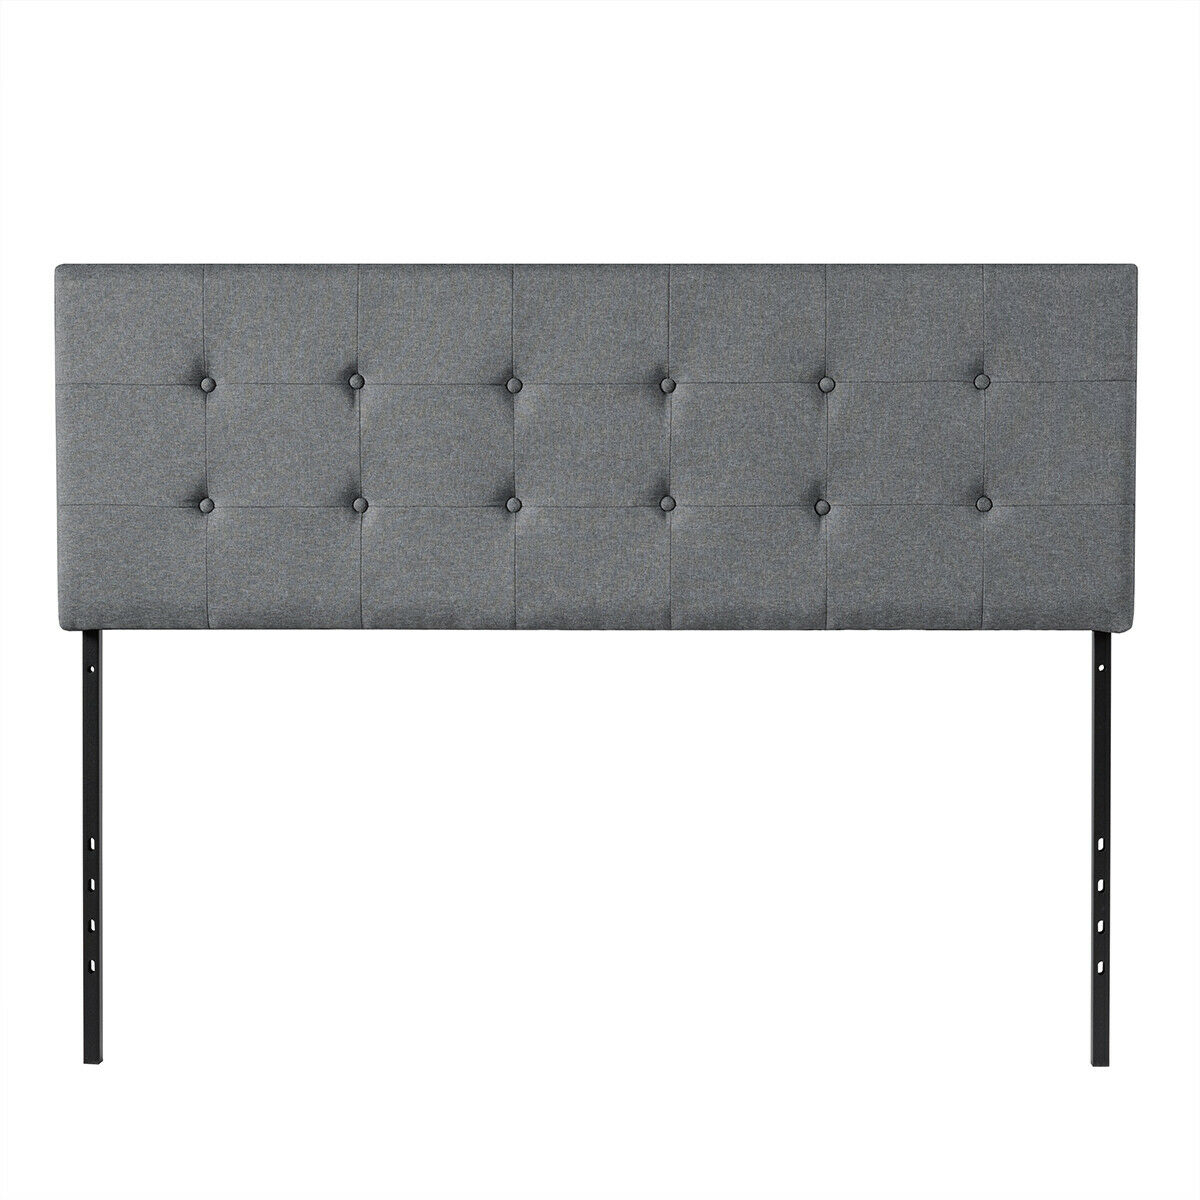 Tufted Linen Fabric Upholstered Queen&Full Size Headboard Height Adjustable Gray